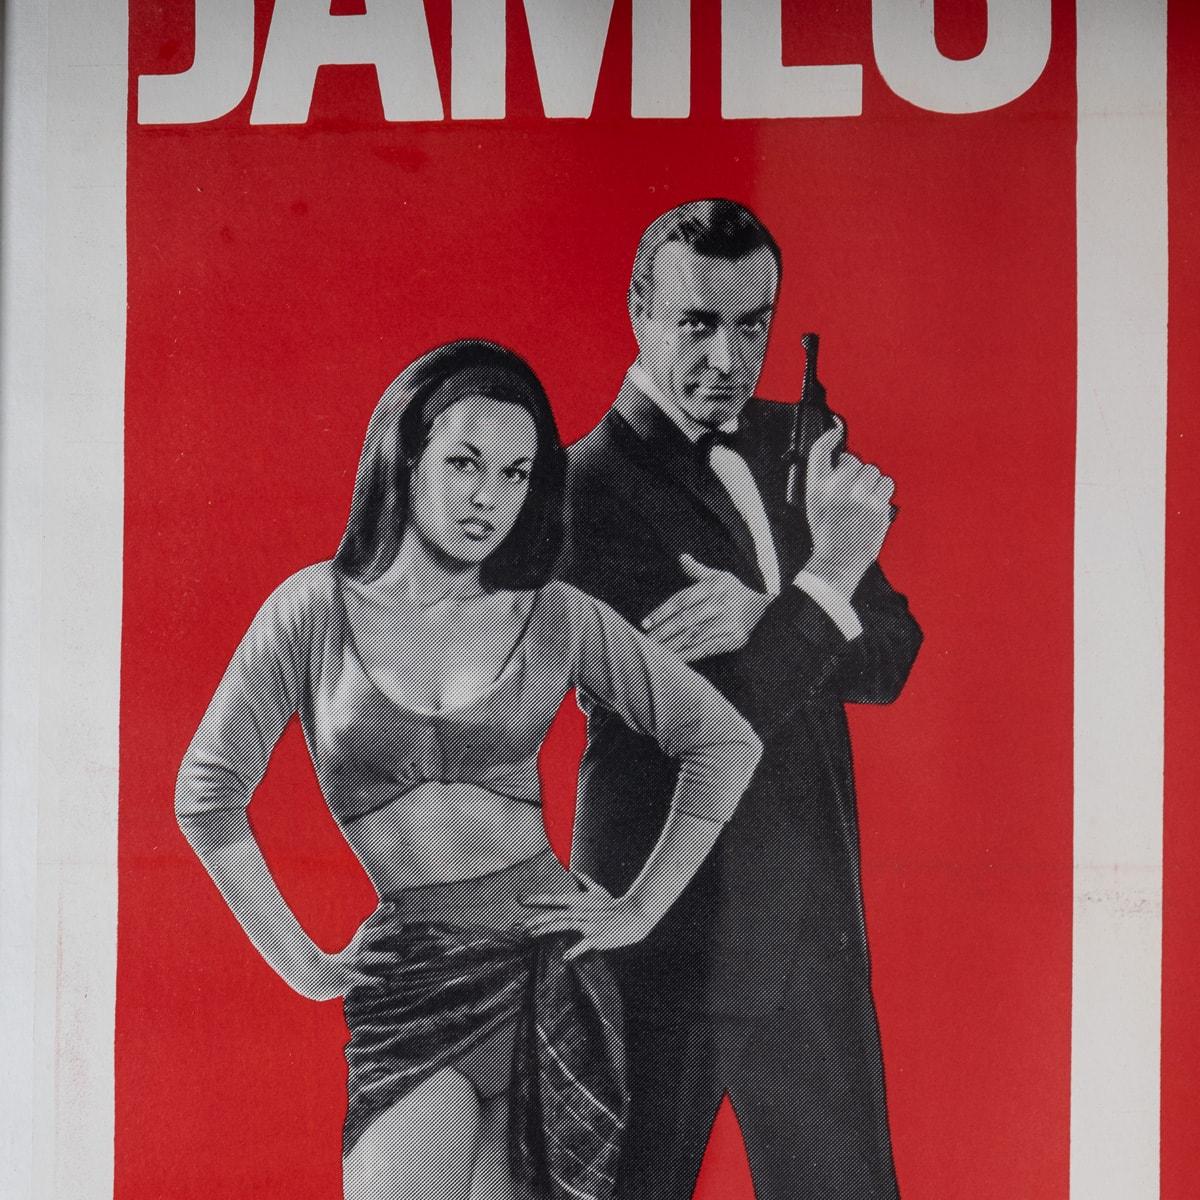 Original American (U.S) Release James Bond 'From Russia With Love' Poster c.1963 In Good Condition For Sale In Royal Tunbridge Wells, Kent